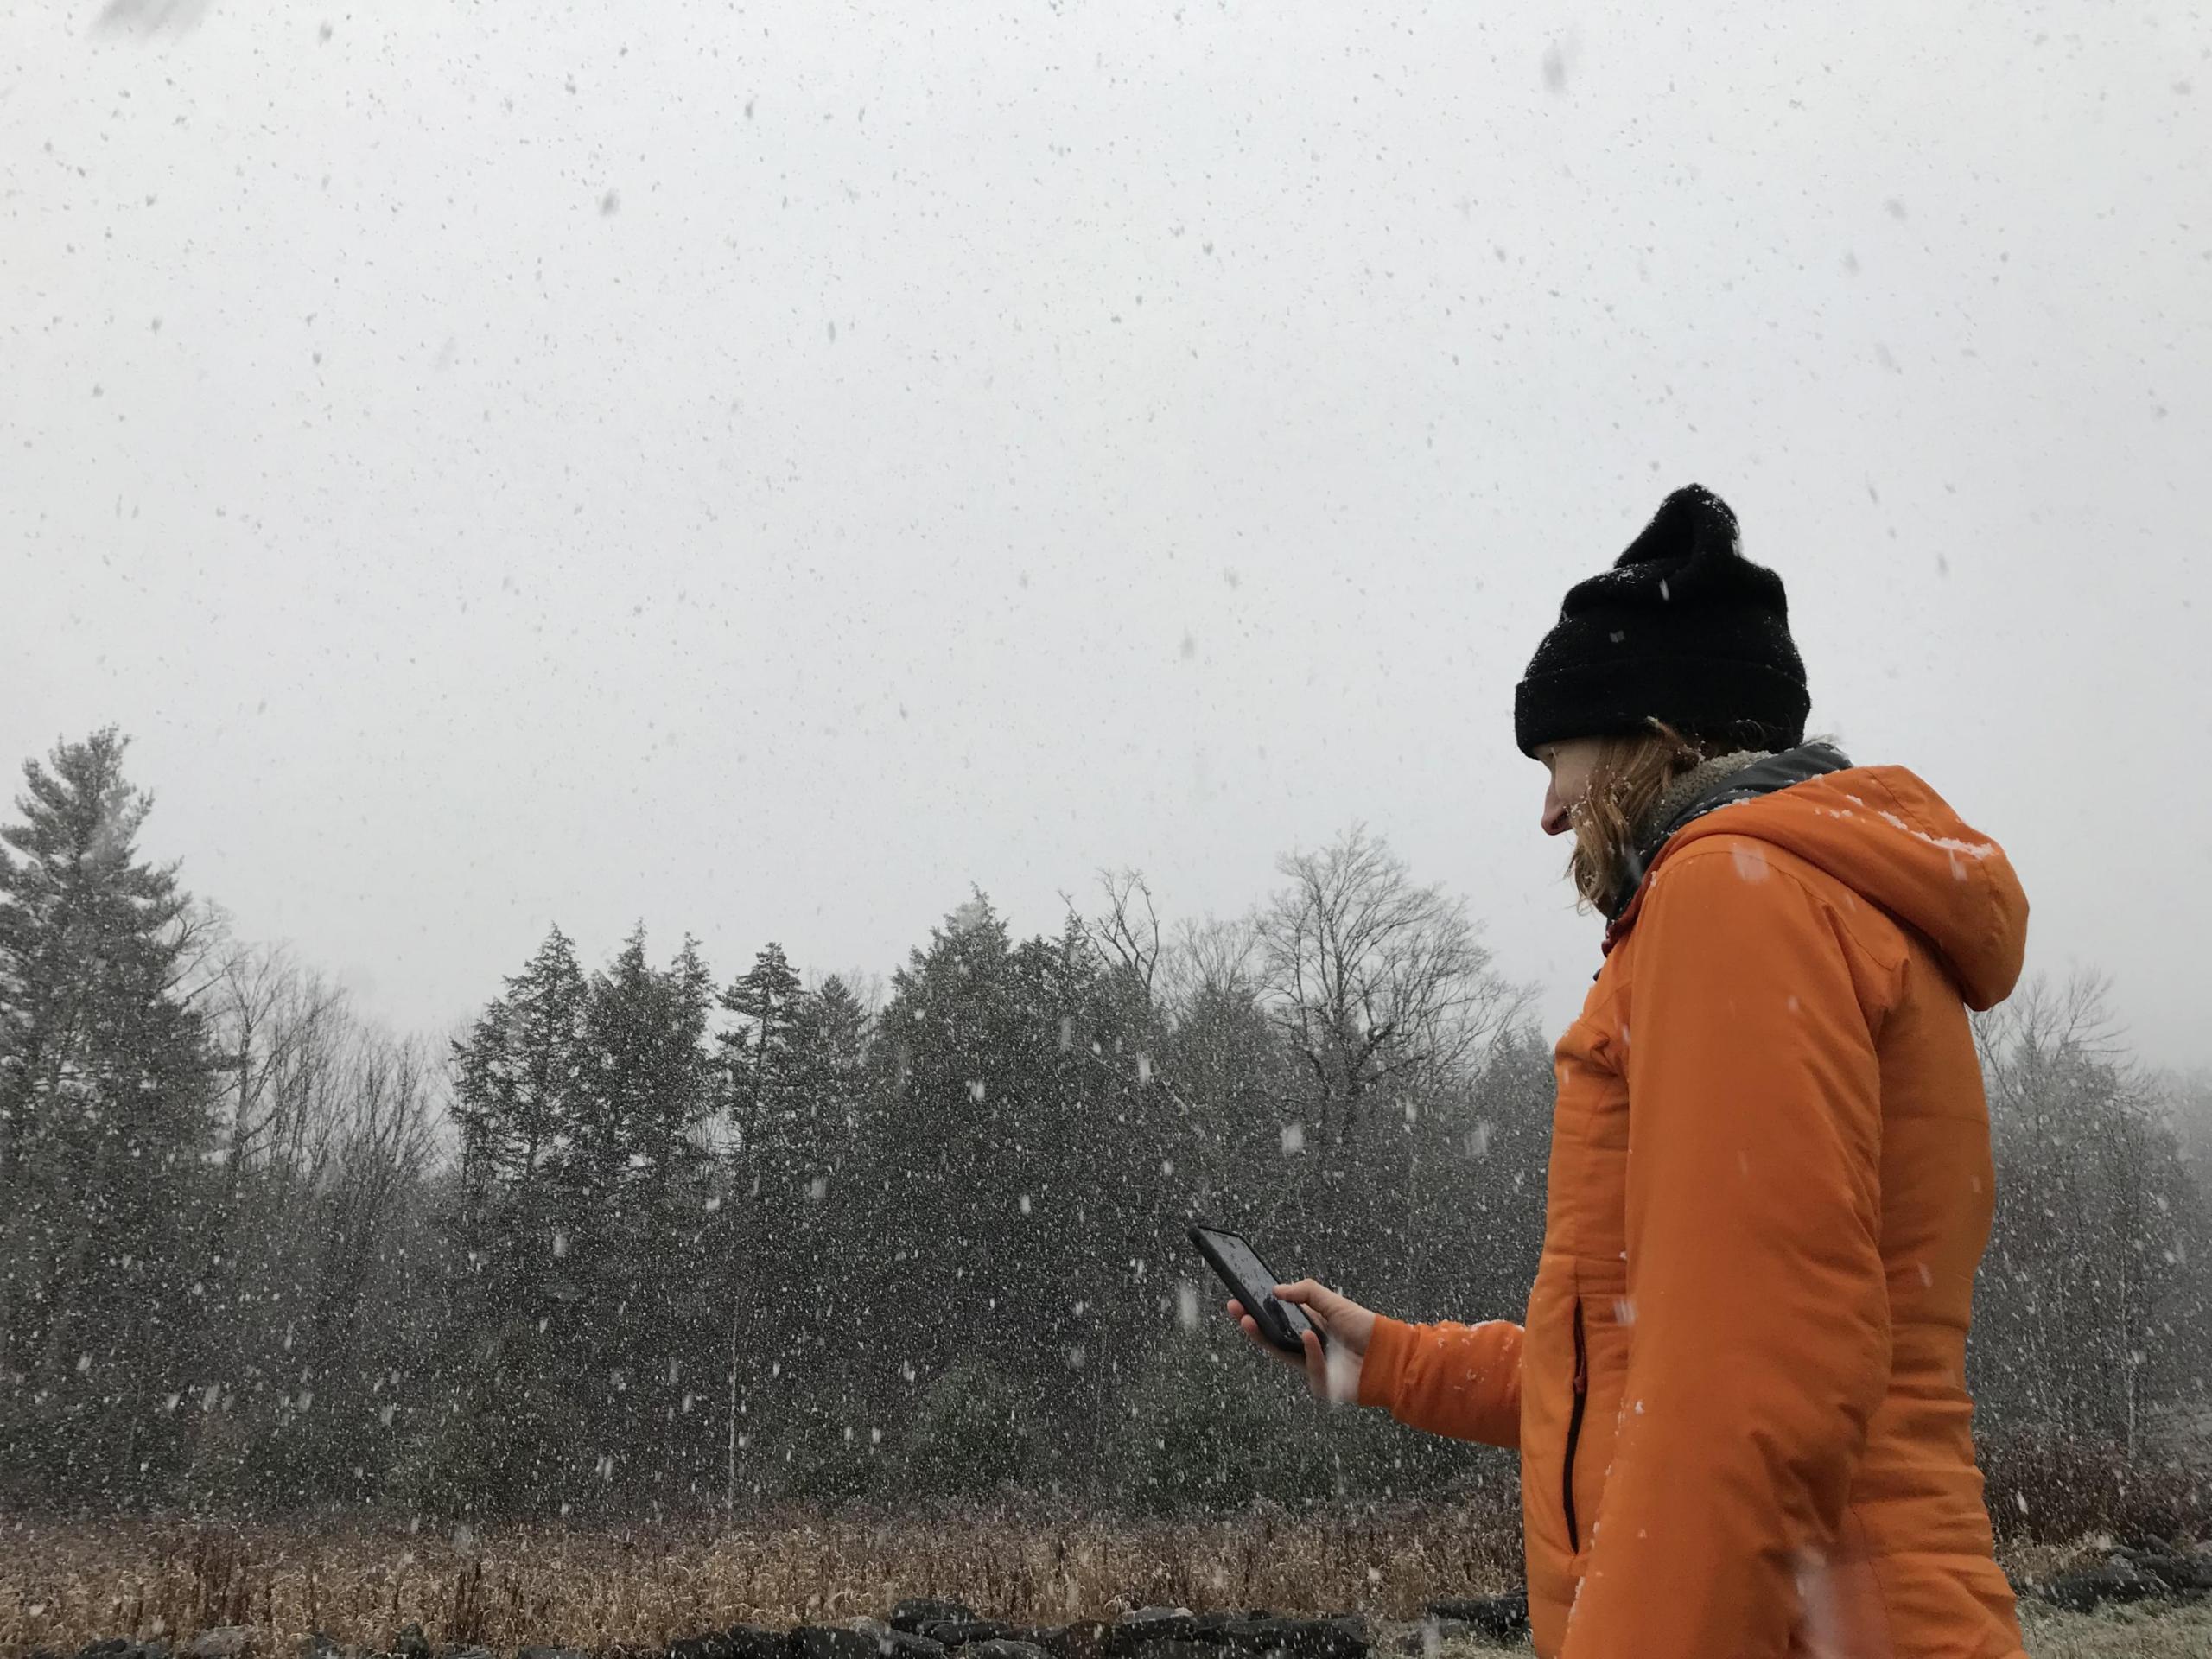 Photograph of a woman wearing an orange jacket and dark hat standing in a field with trees in the distance while she collects falling snow.